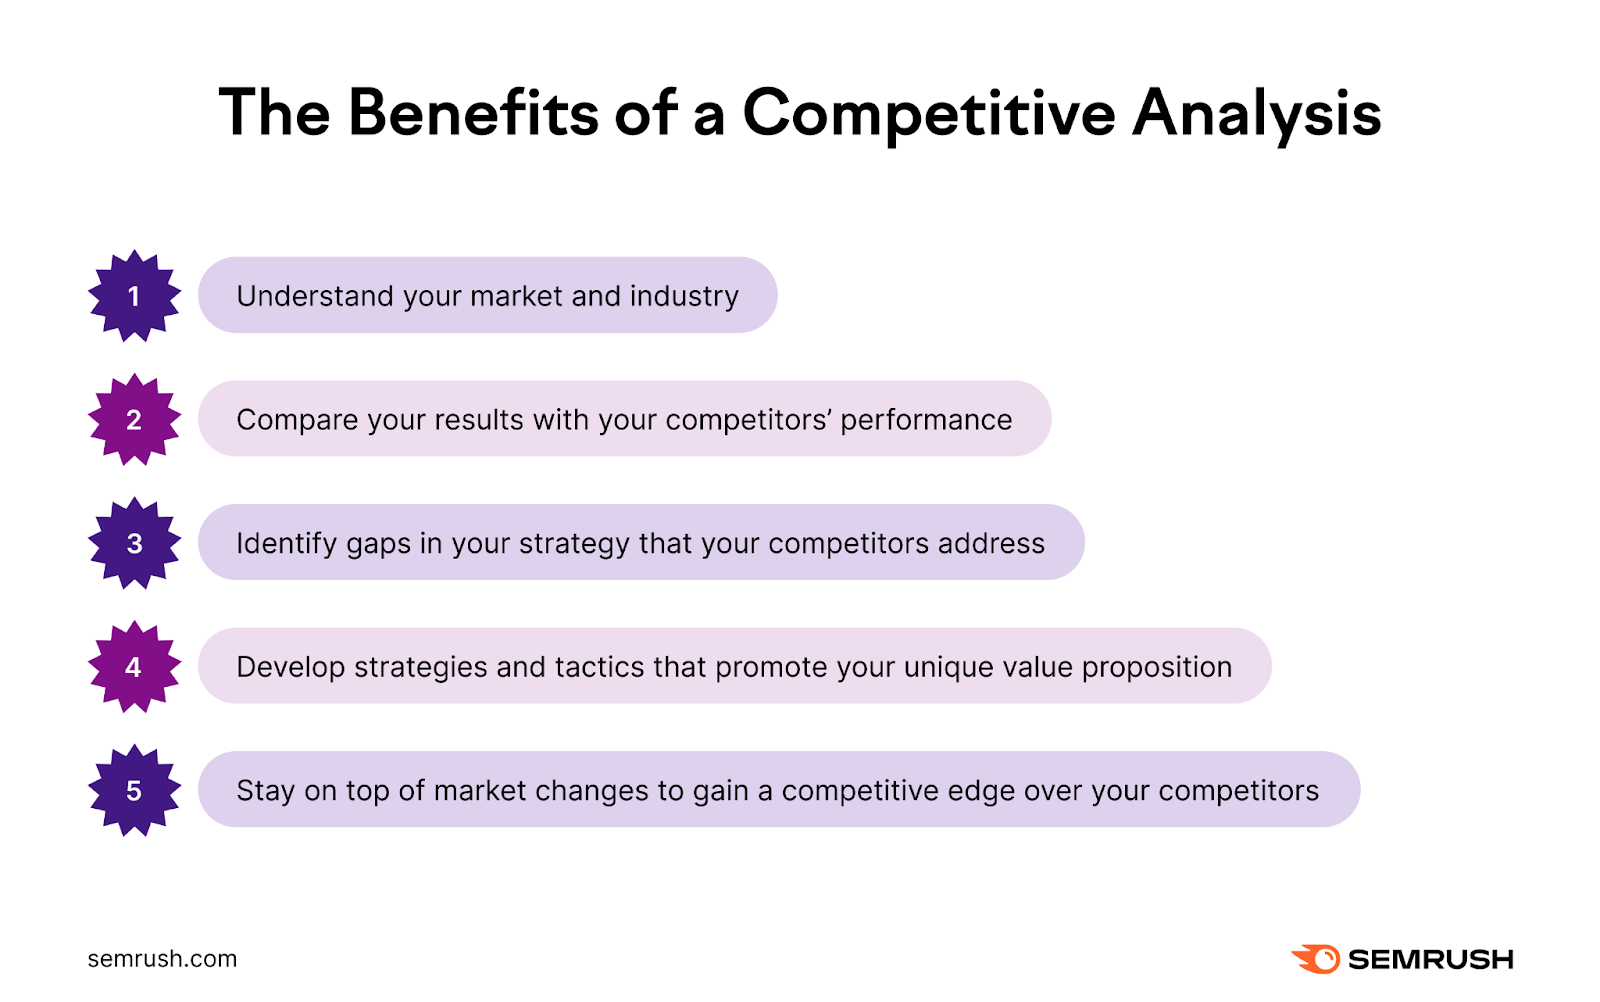 The benefits of a competitive analysis